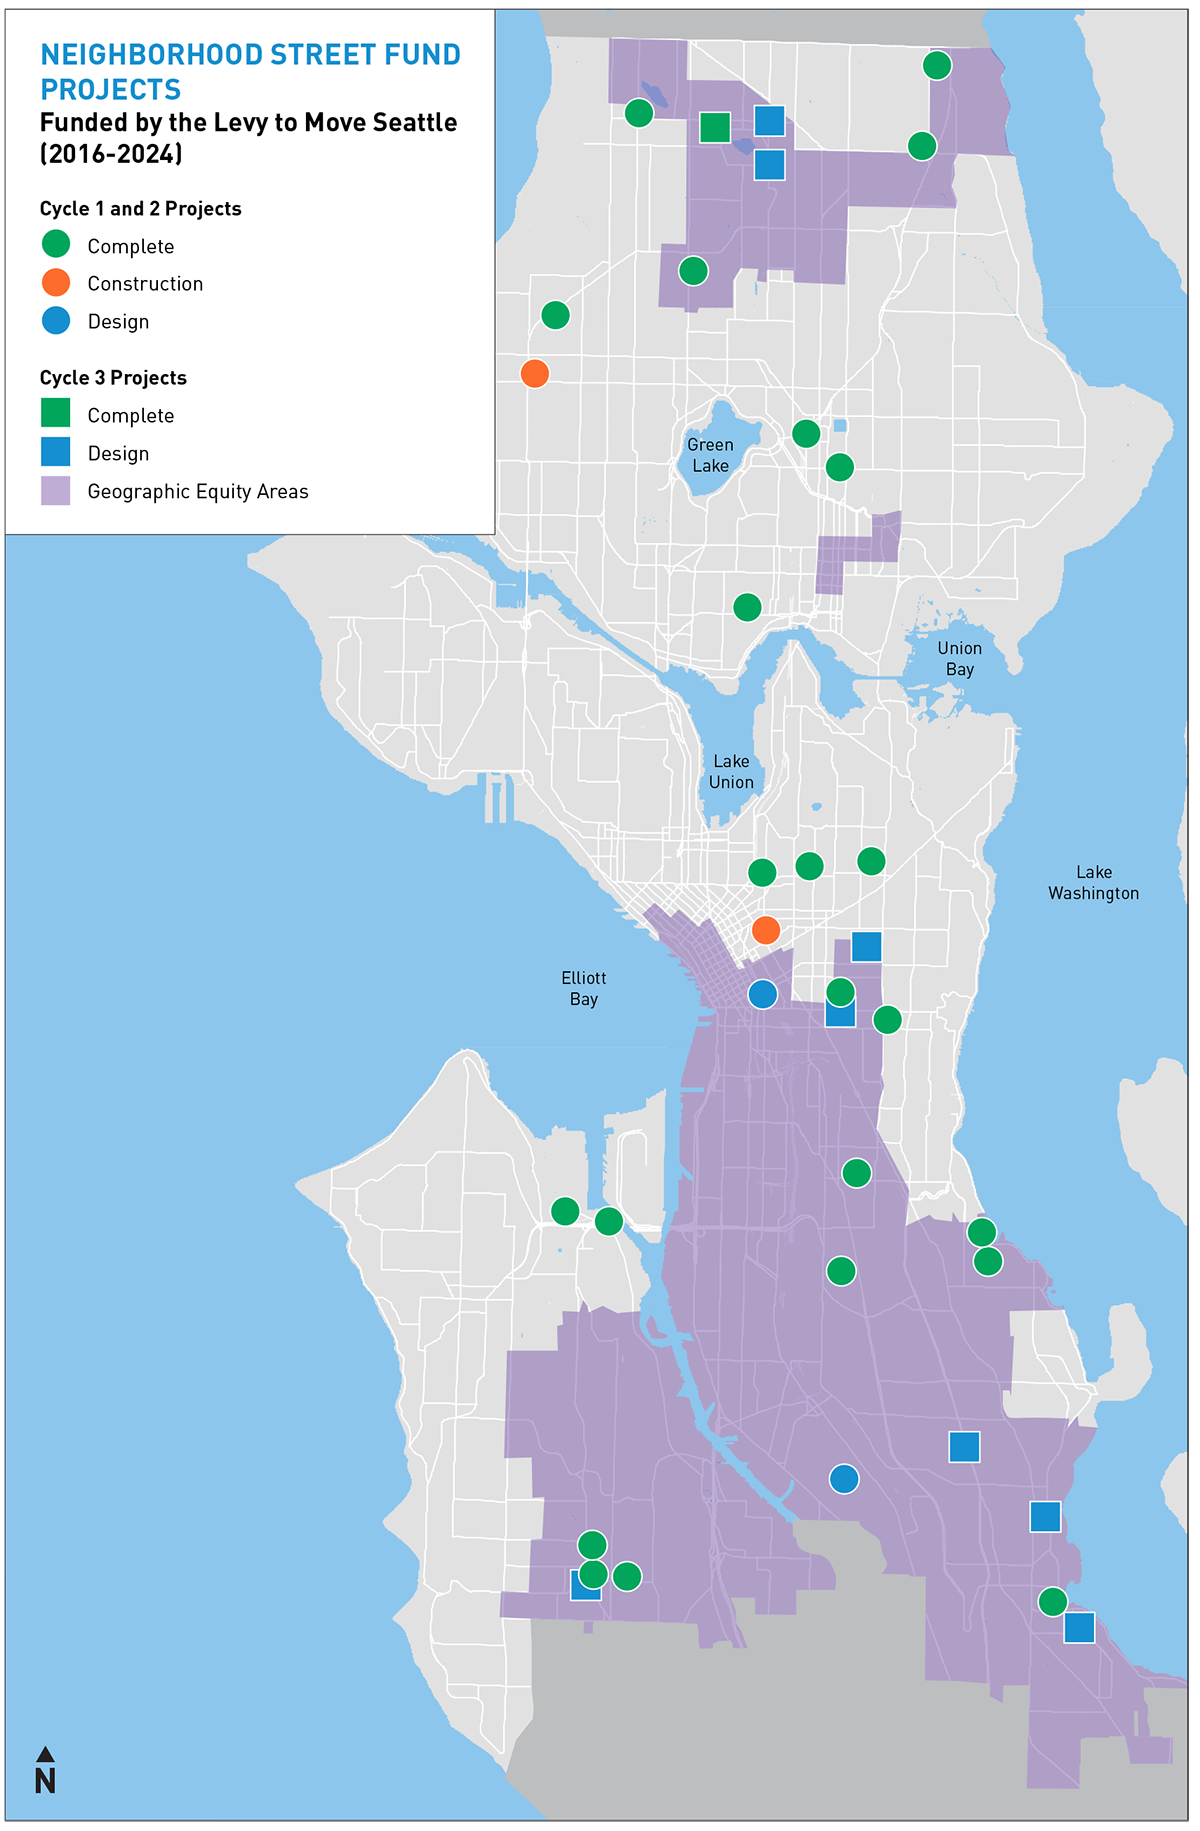 Map of Neighborhood Street Fund funded by the Levy to Move Seattle and geographic equity areas for Cycle 3 